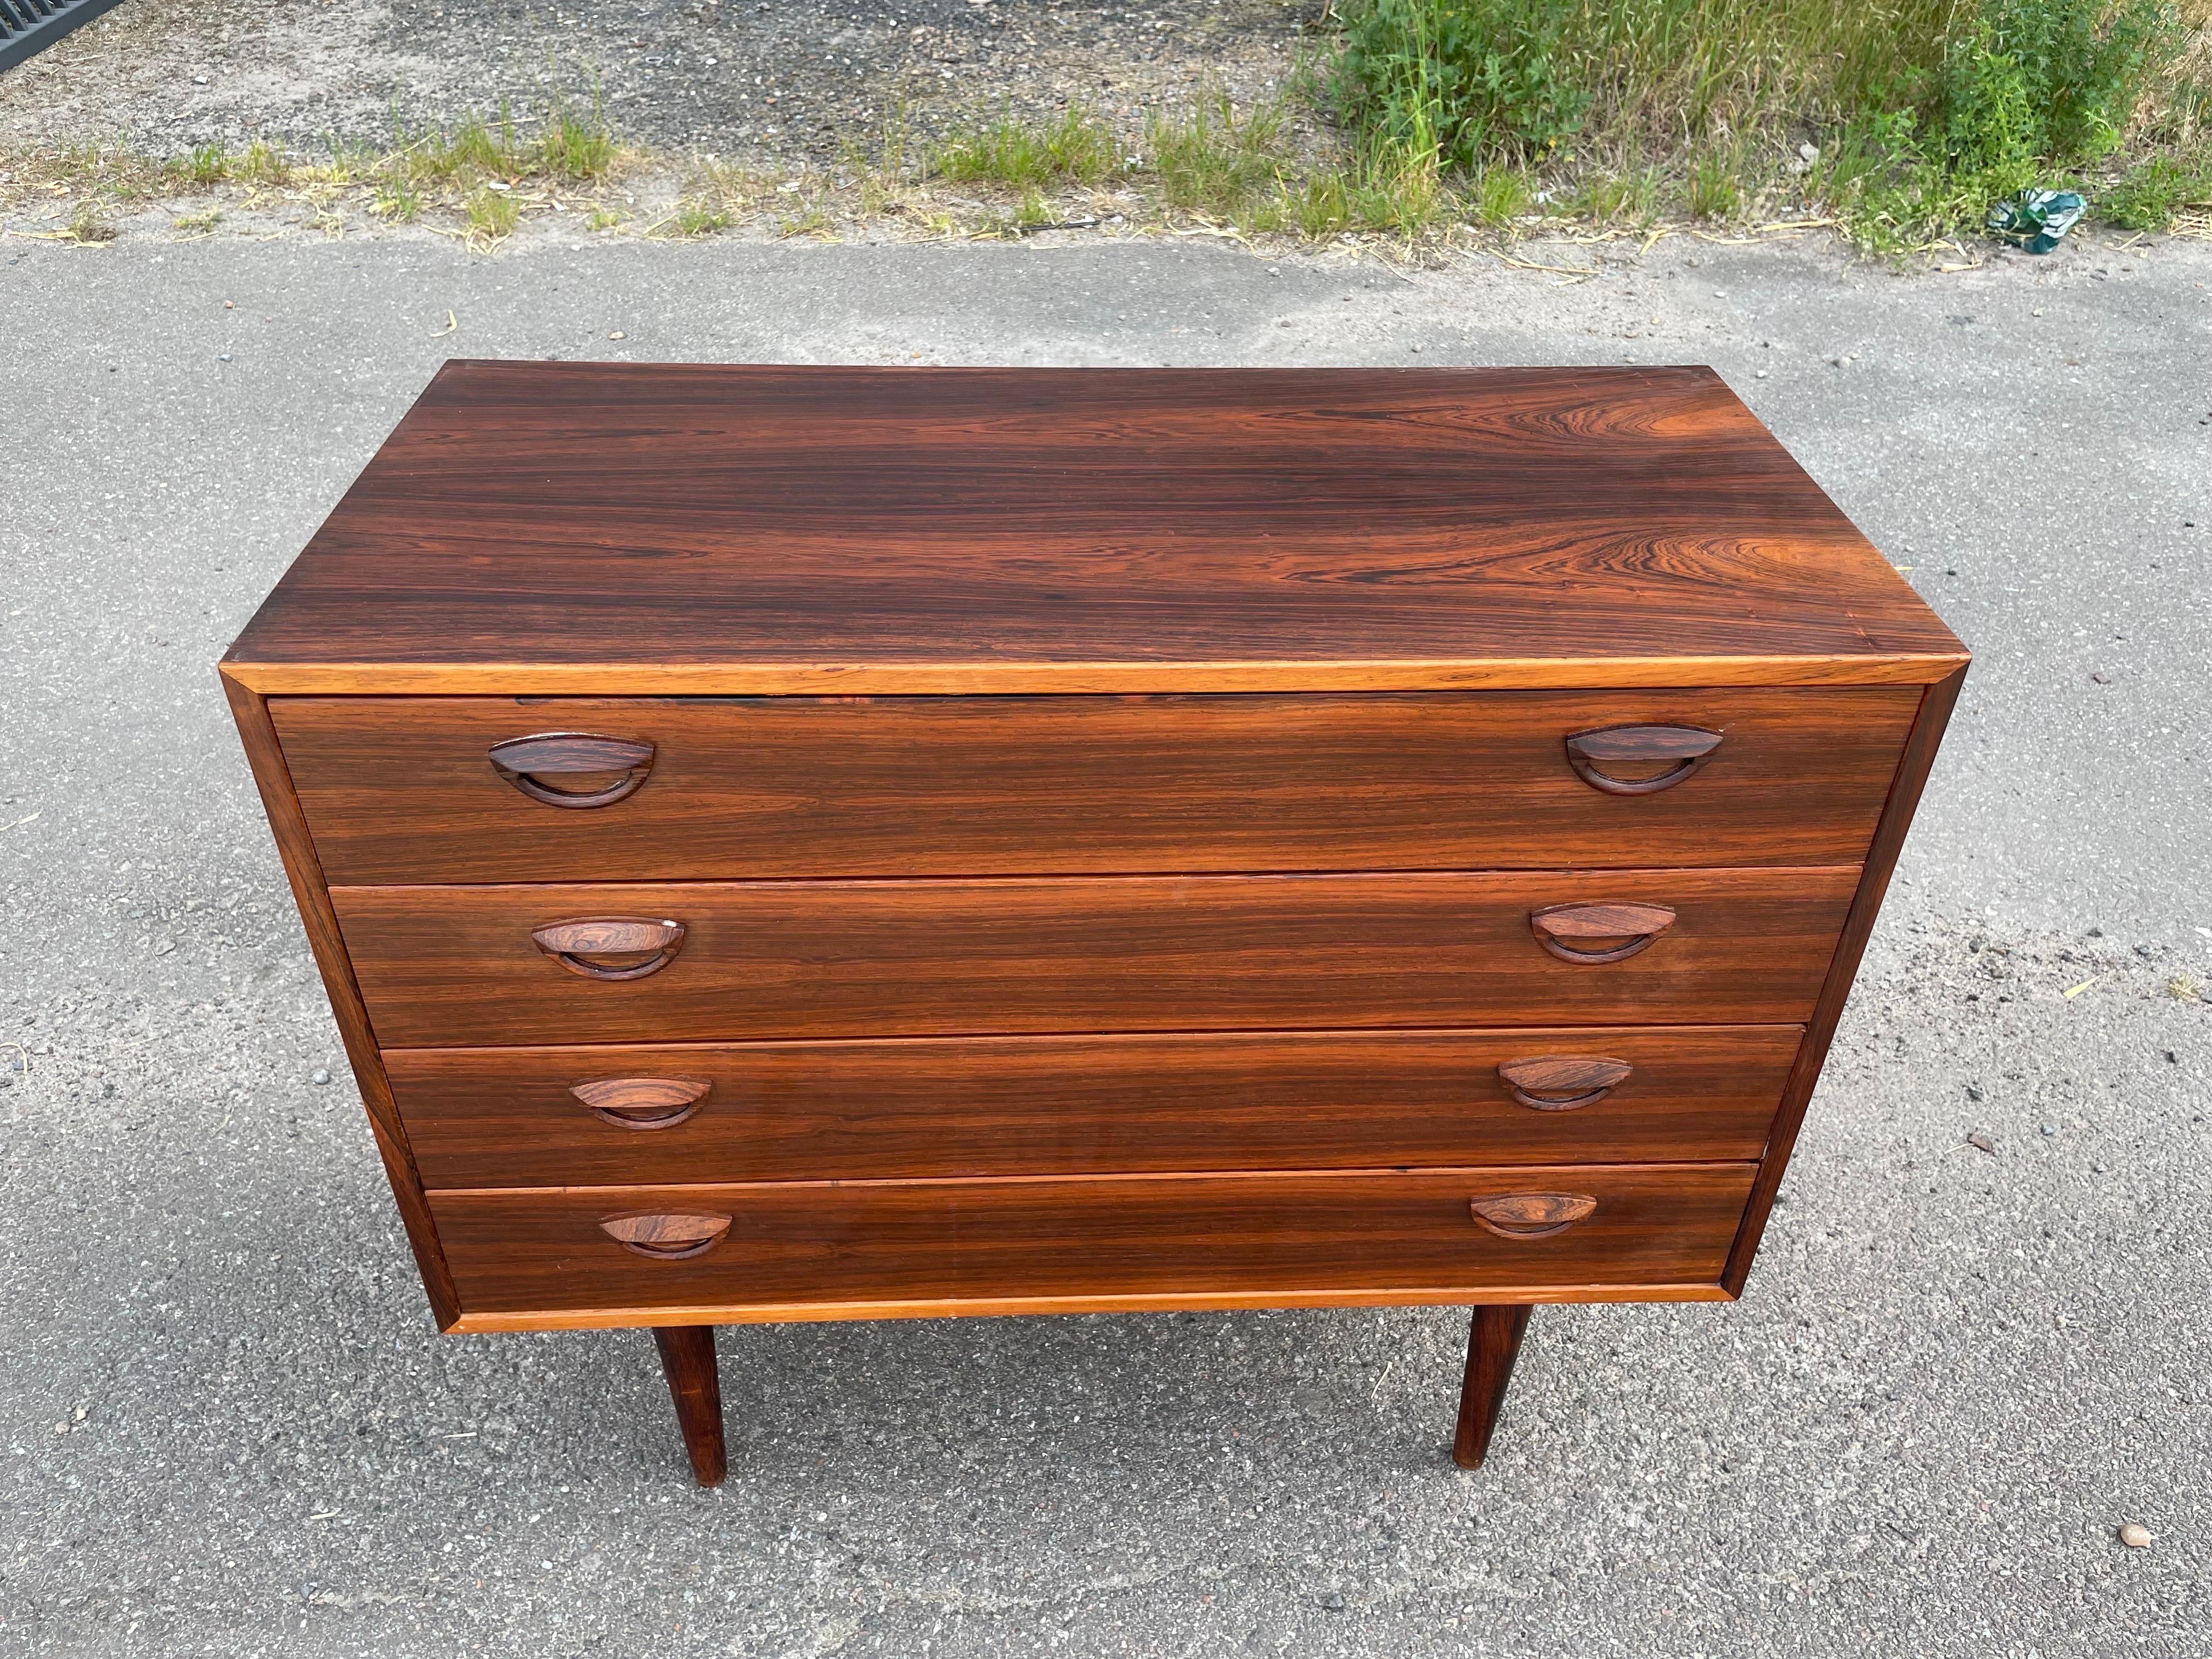 Beautiful Danish Midcentury Chest of Drawers by Kai Kristiansen 1960s For Sale 1